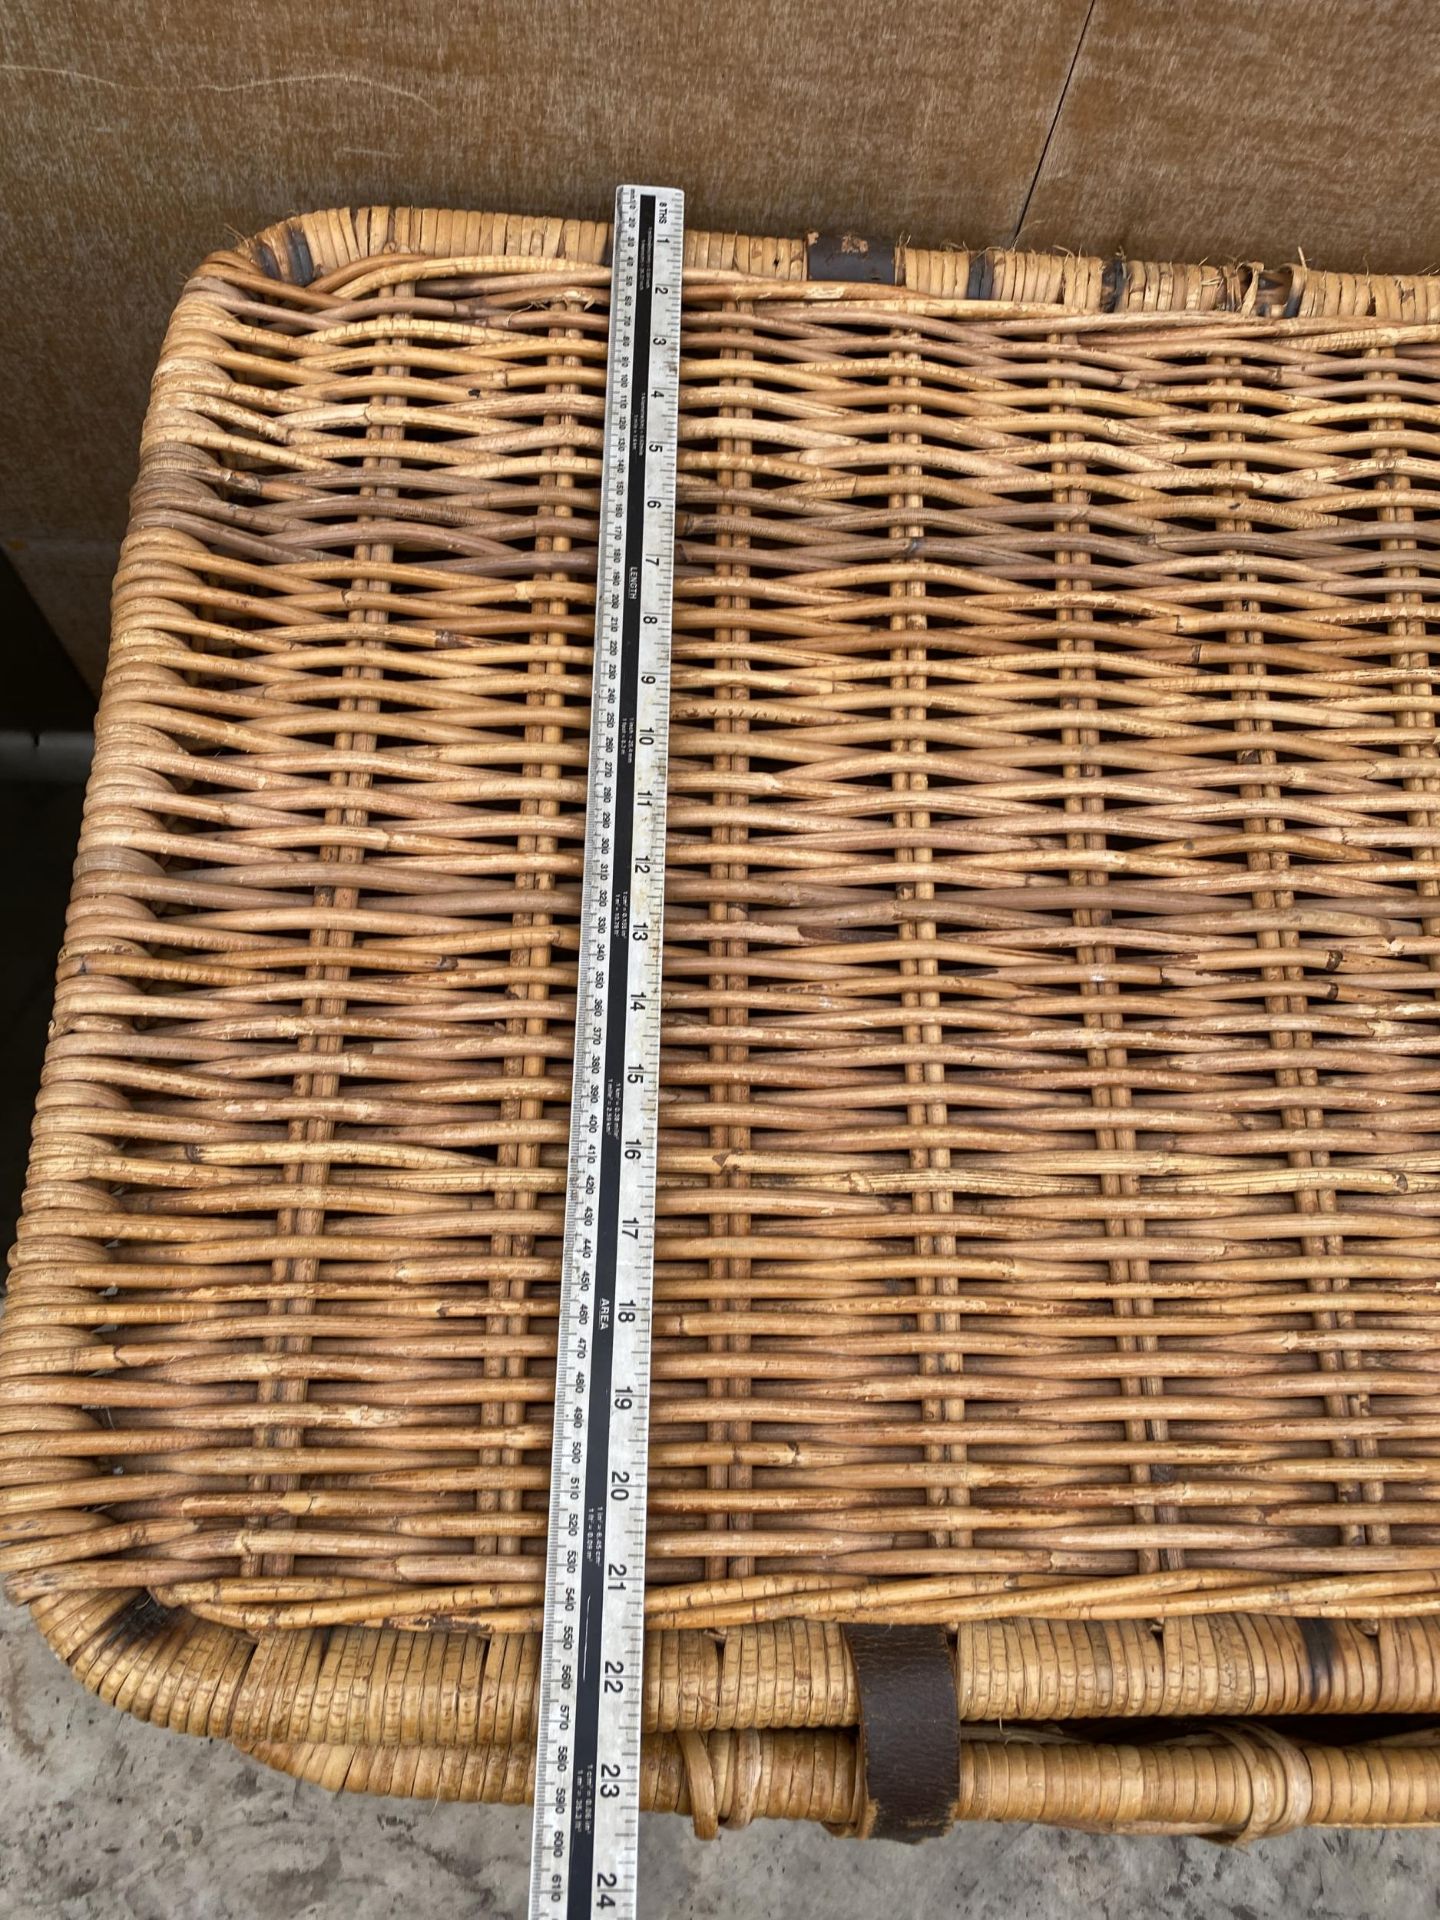 A LARGE WICKER LOG BASKET WITH HINGED LID AND LEATHER STRAPPING - Image 4 of 4